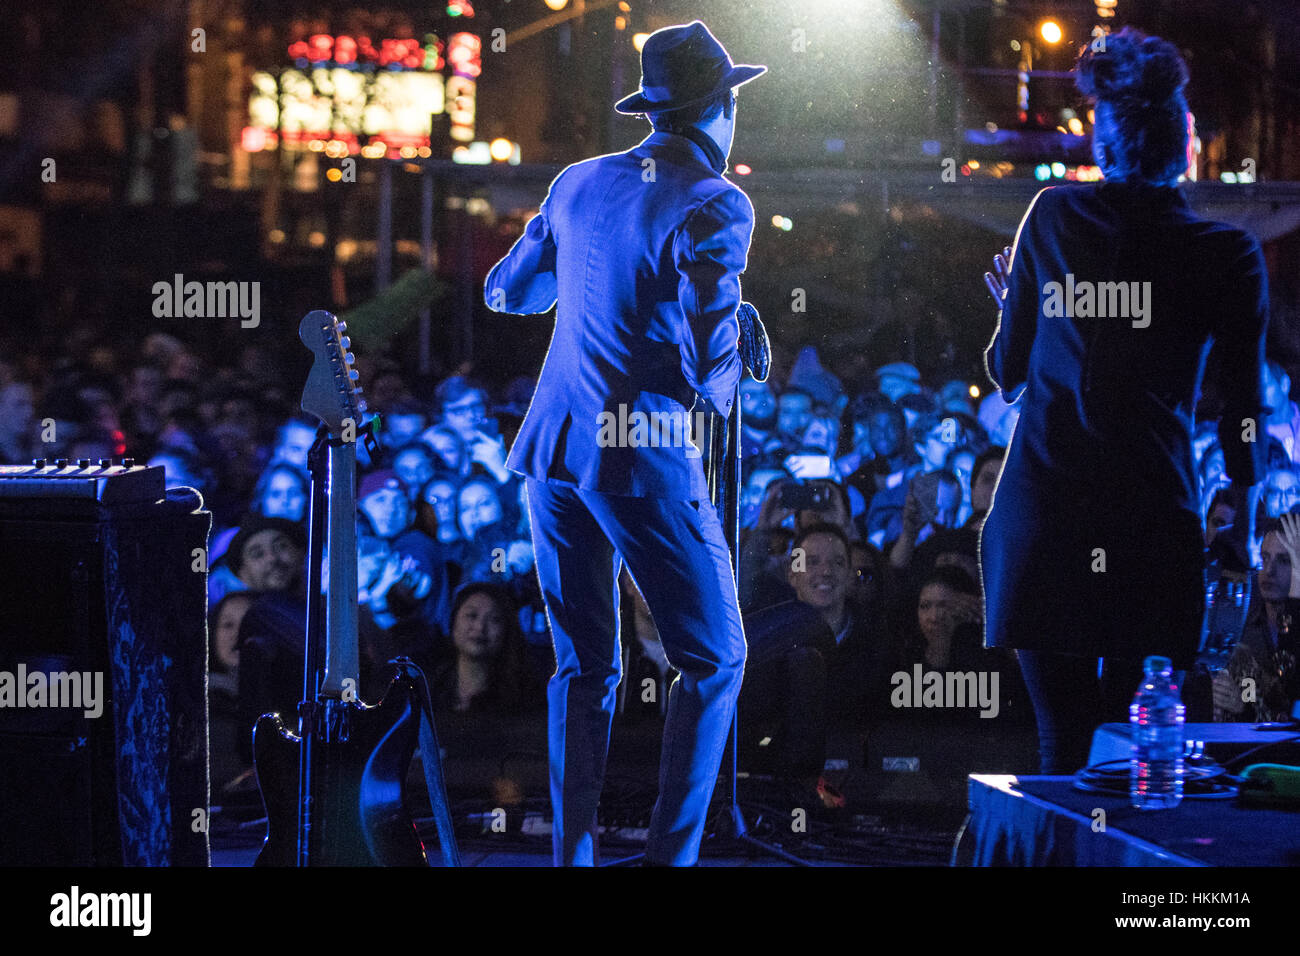 Los Angeles, California, USA. 28th Jan, 2017. Music artist Mayer Hawthorne performs on stage at the "Night on Broadway" arts and music festival in downtown Los Angeles, California, USA, on January 28th, 2017. Credit: Sheri Determan/Alamy Live News Stock Photo